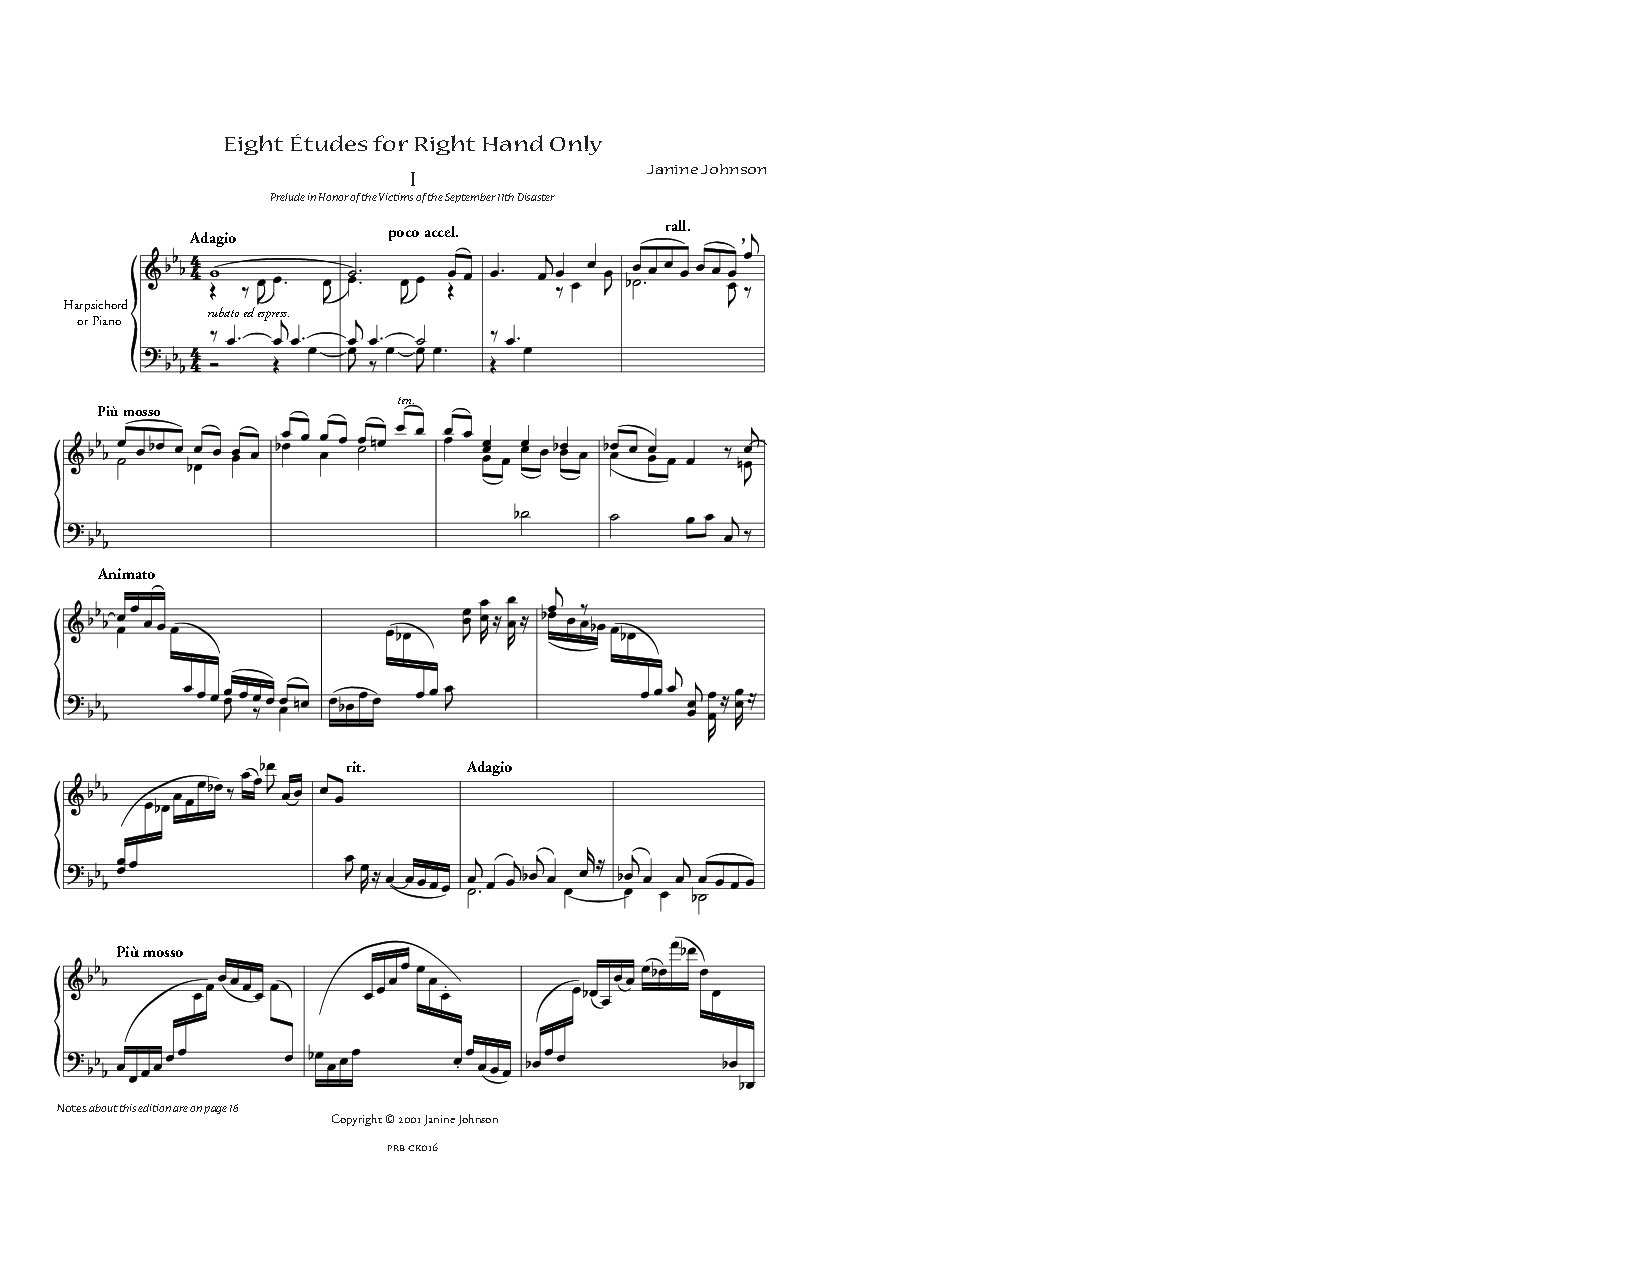 EIGHT ETUDES FOR RIGHT HAND ONLY OP 30 PIANO